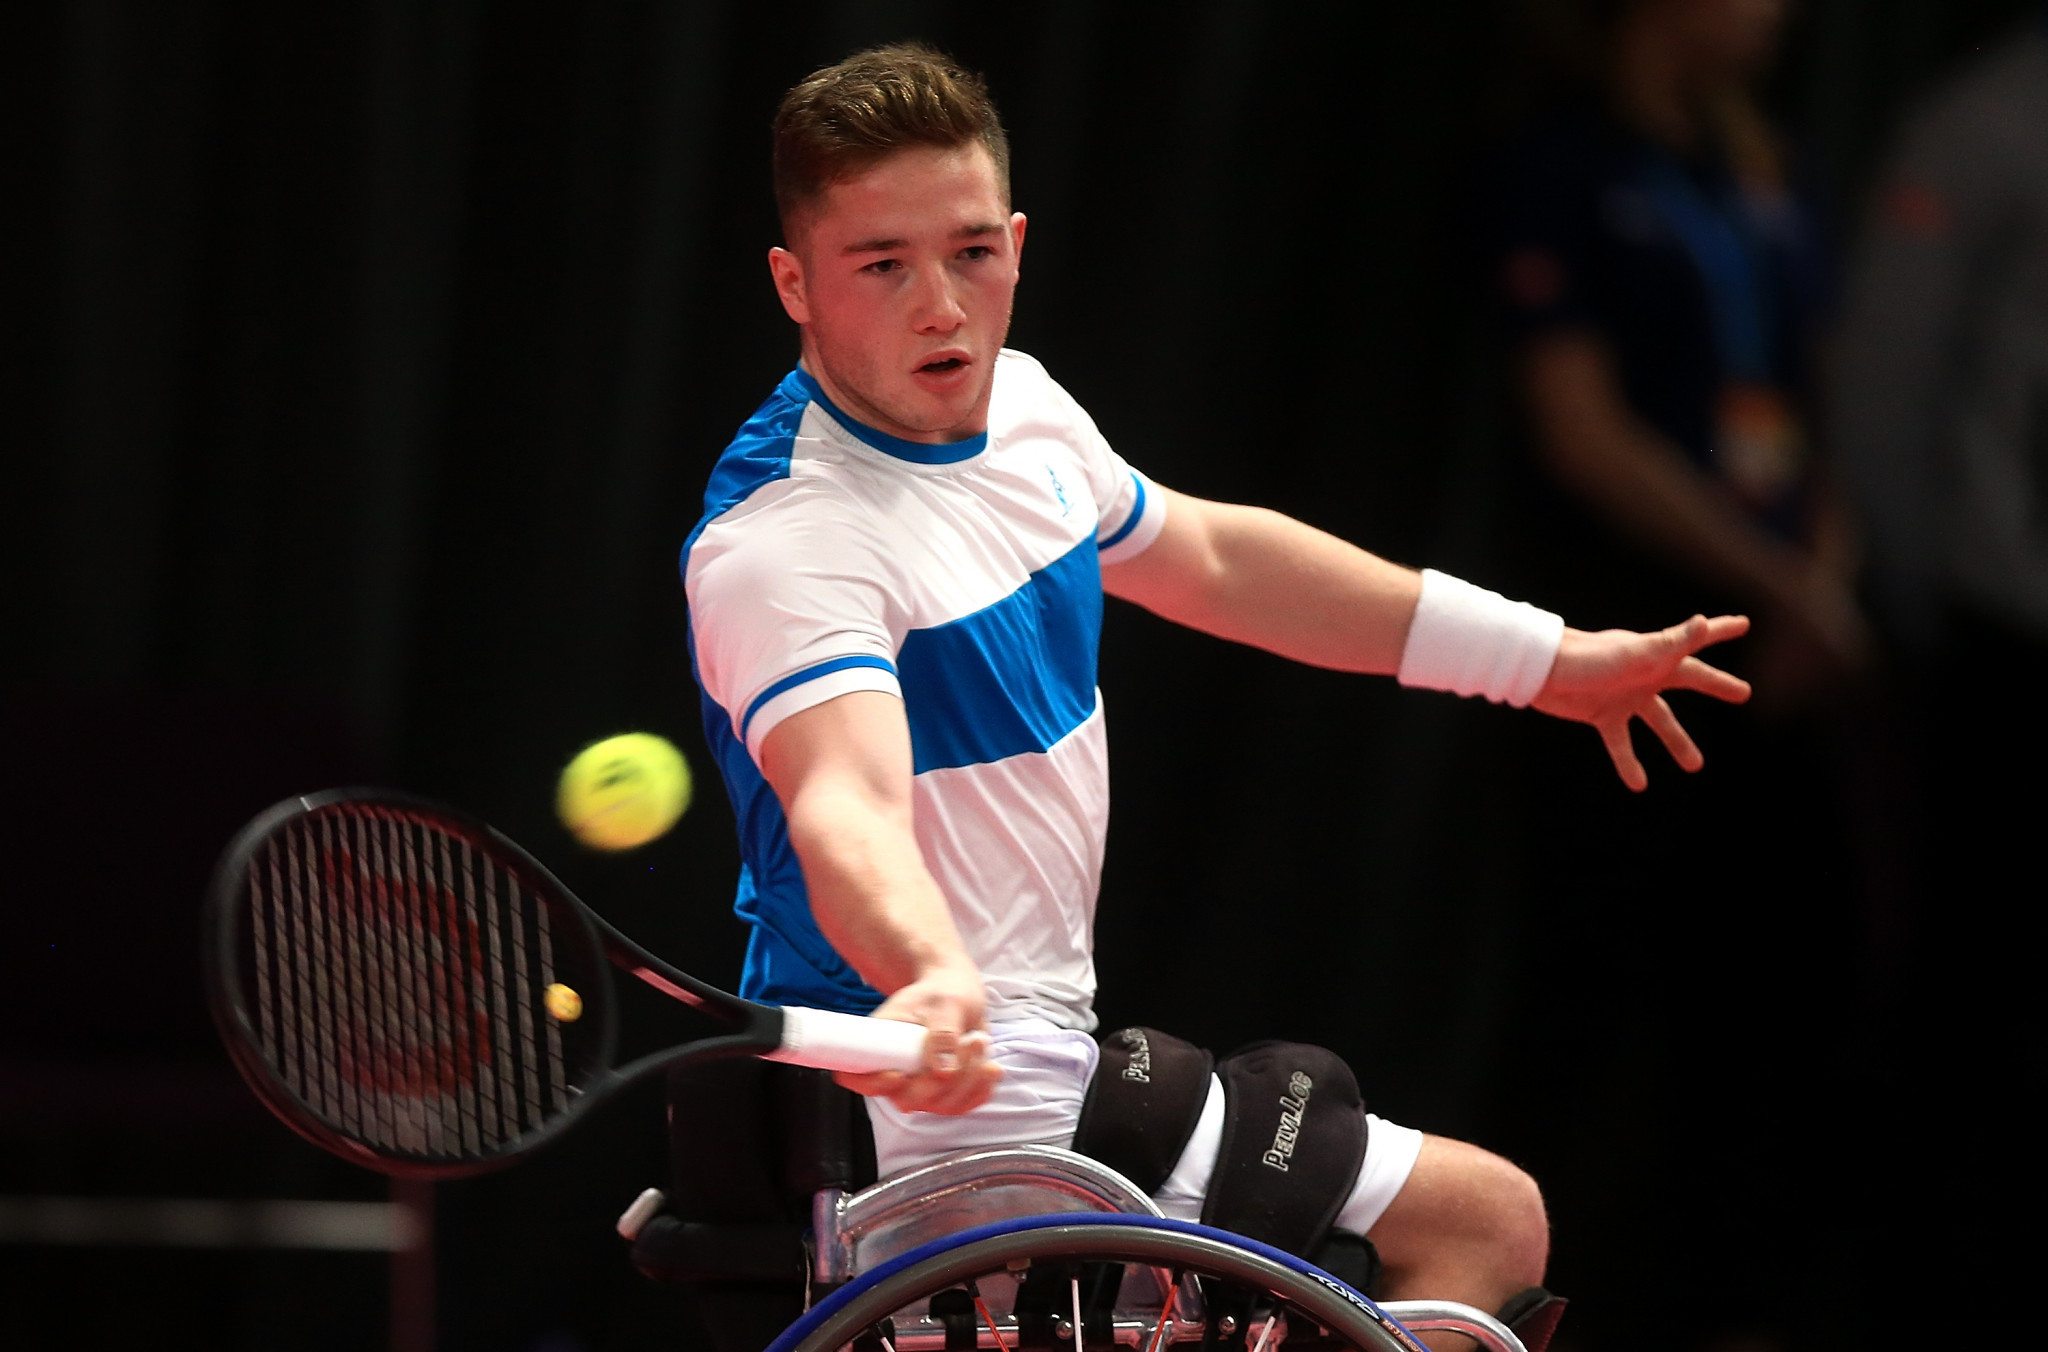 ITF and Grand Slam tournaments come together to support wheelchair tennis